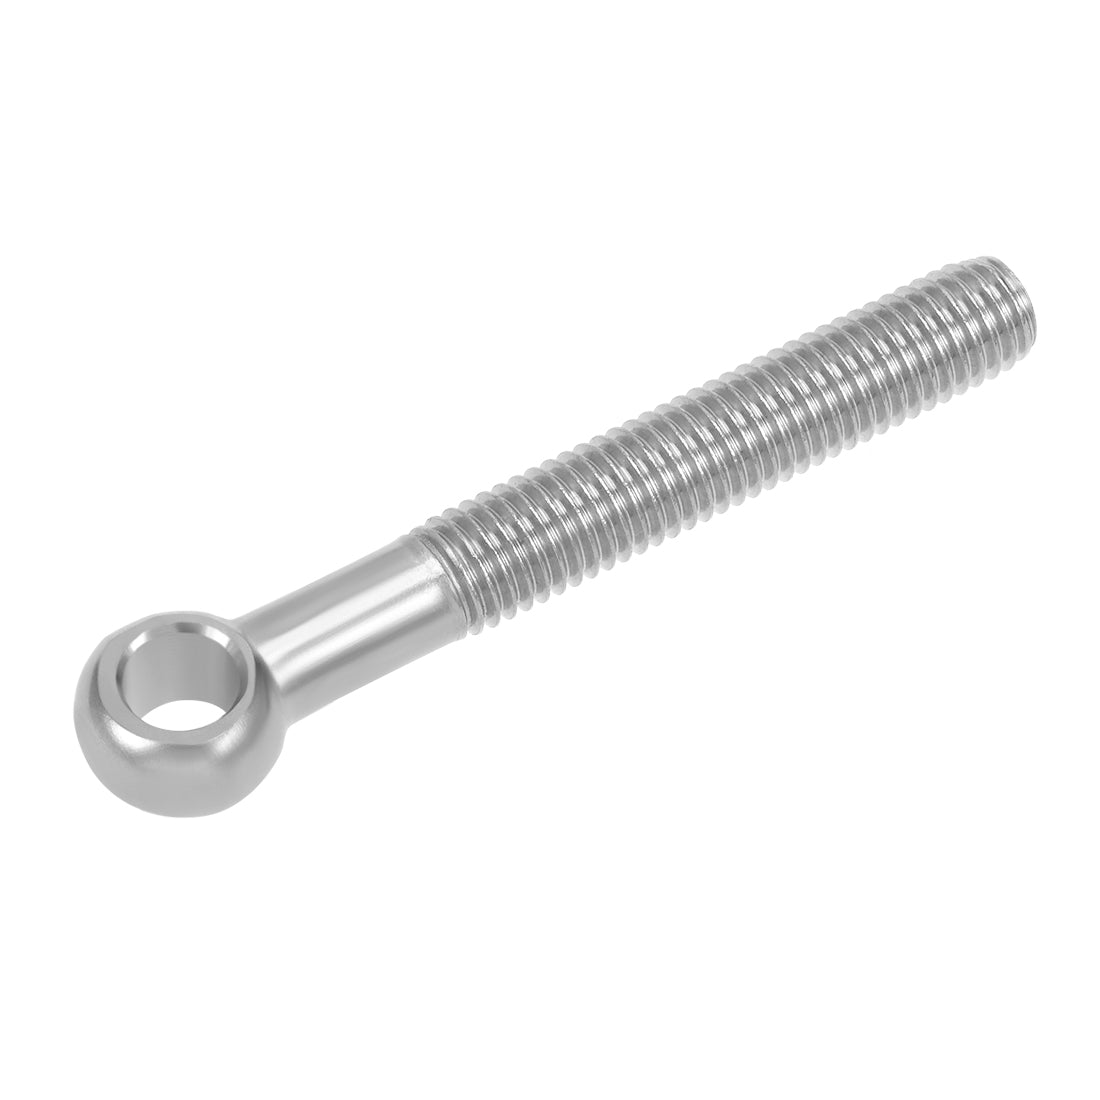 uxcell Uxcell M12 x 90mm Machinery Shoulder Swing Lifting Eye Bolt 304 Stainless Steel Metric Thread